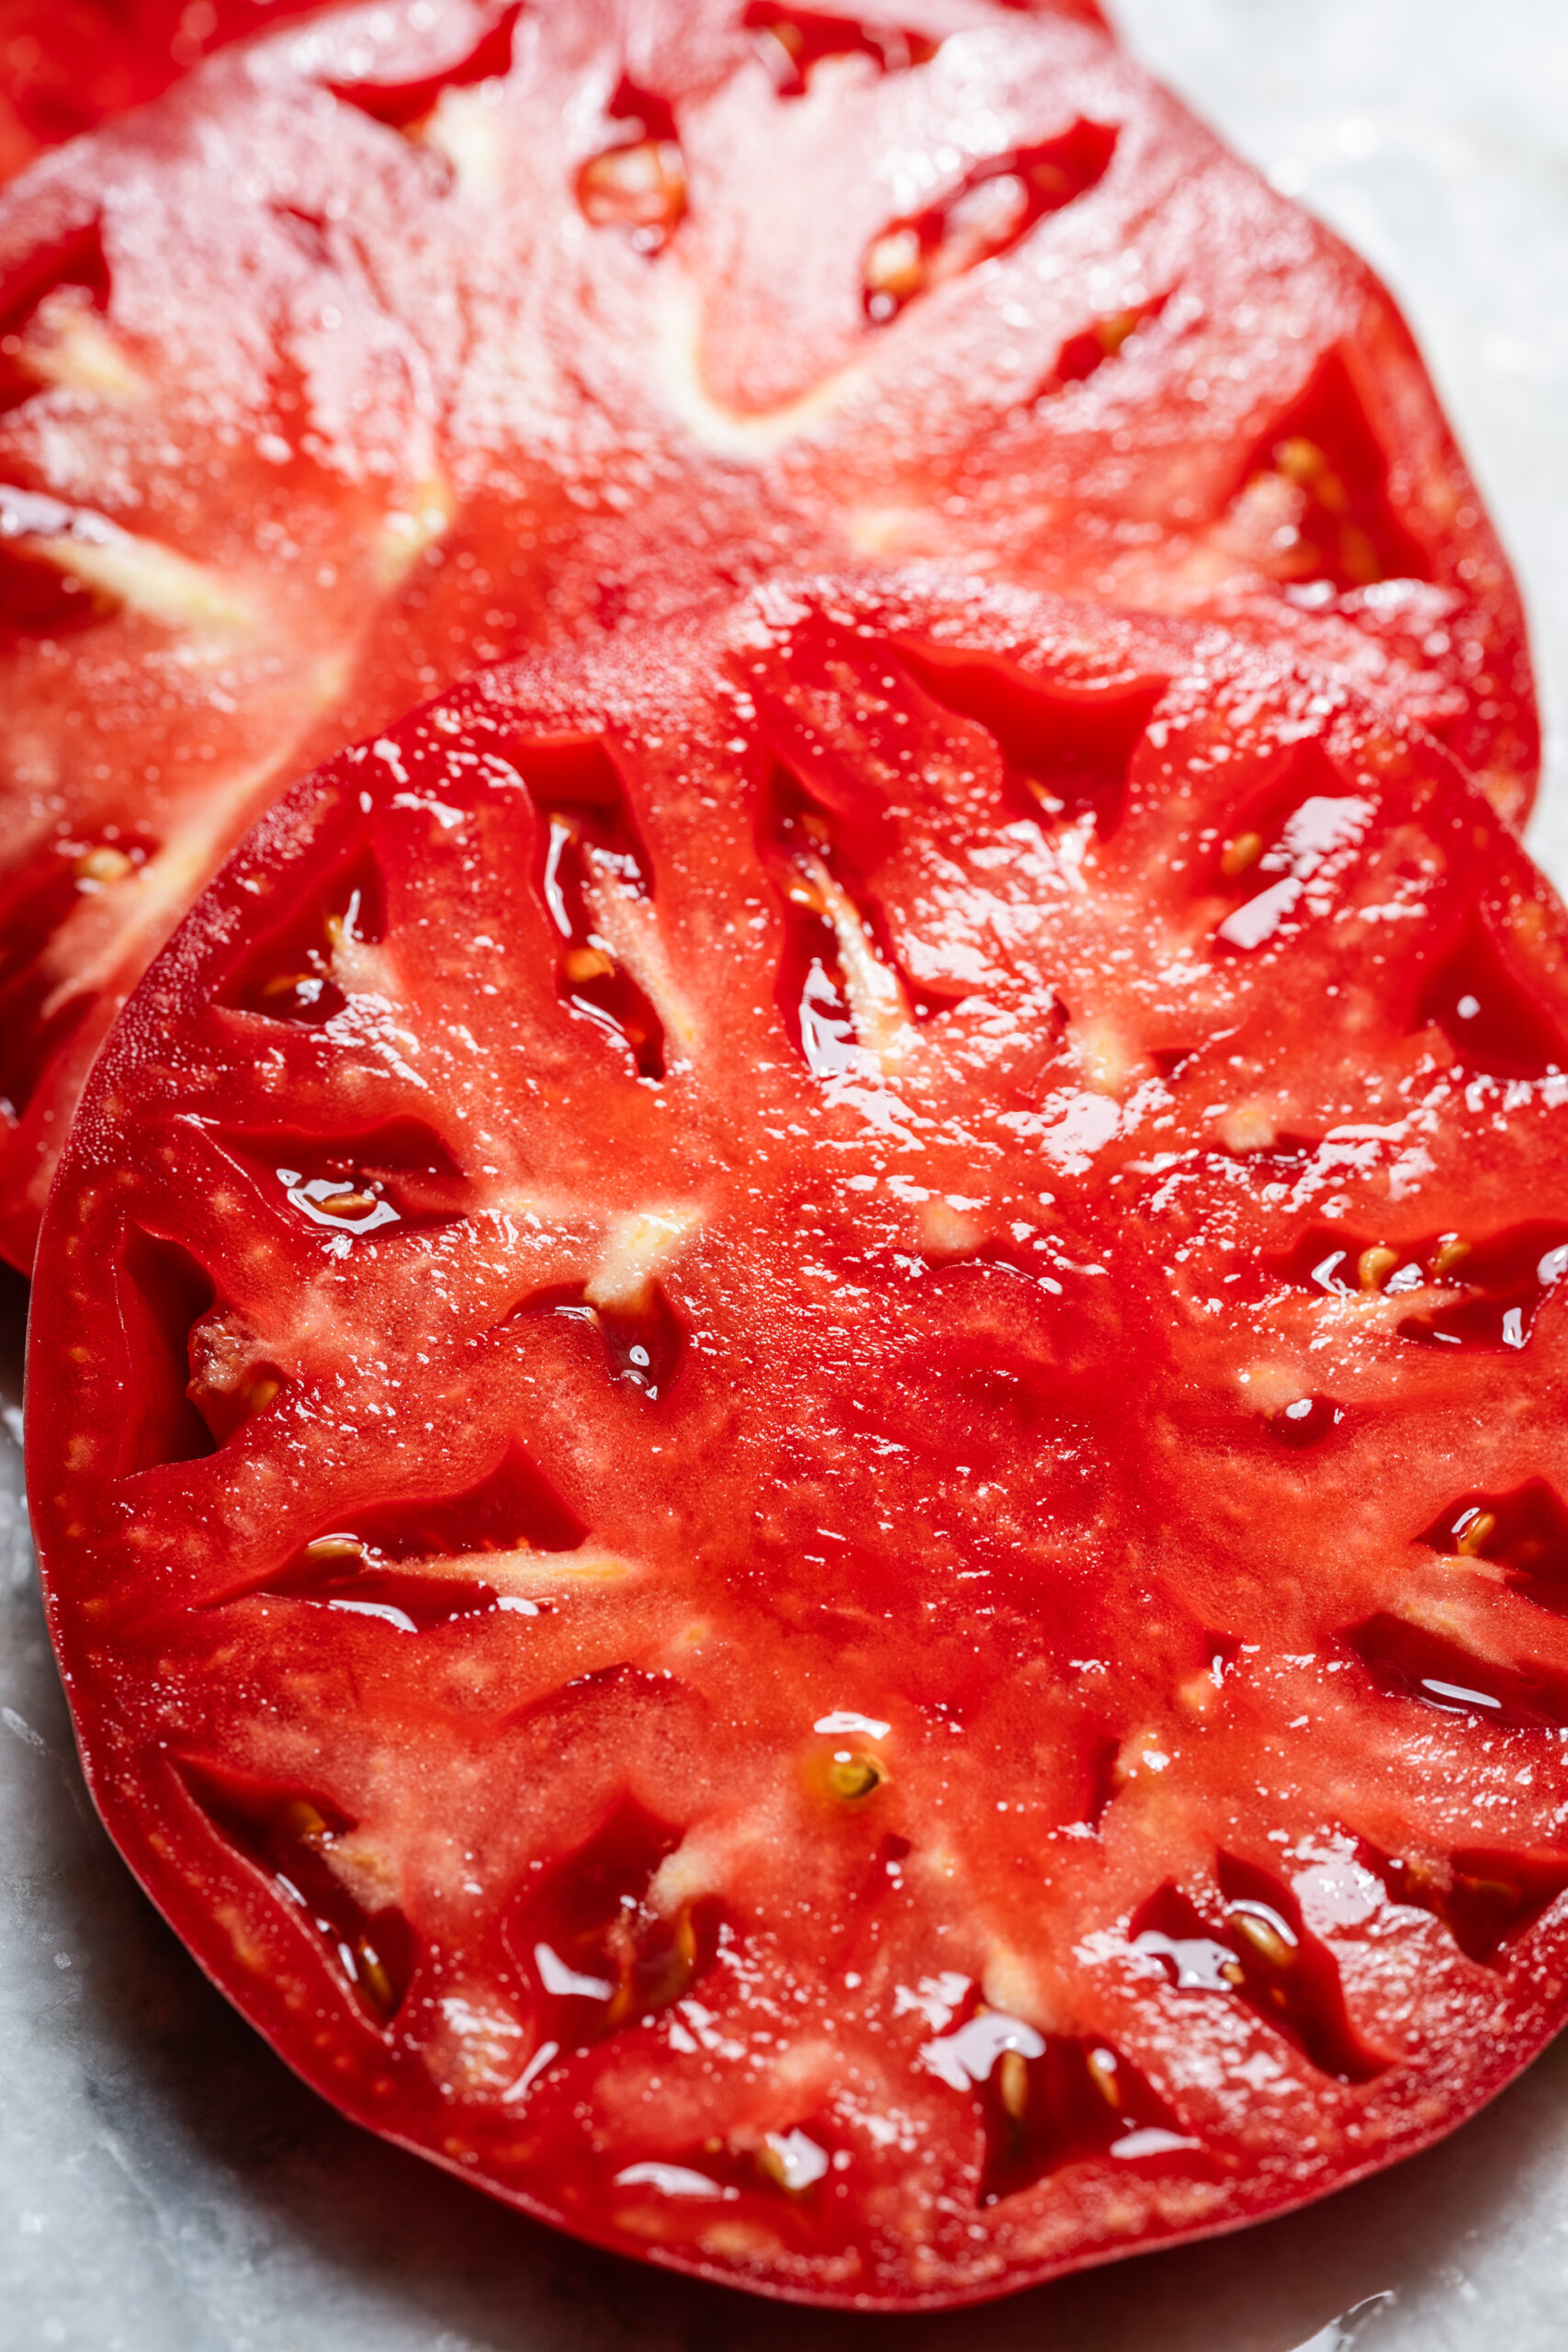 Close-up photograph of heirloom tomato slices